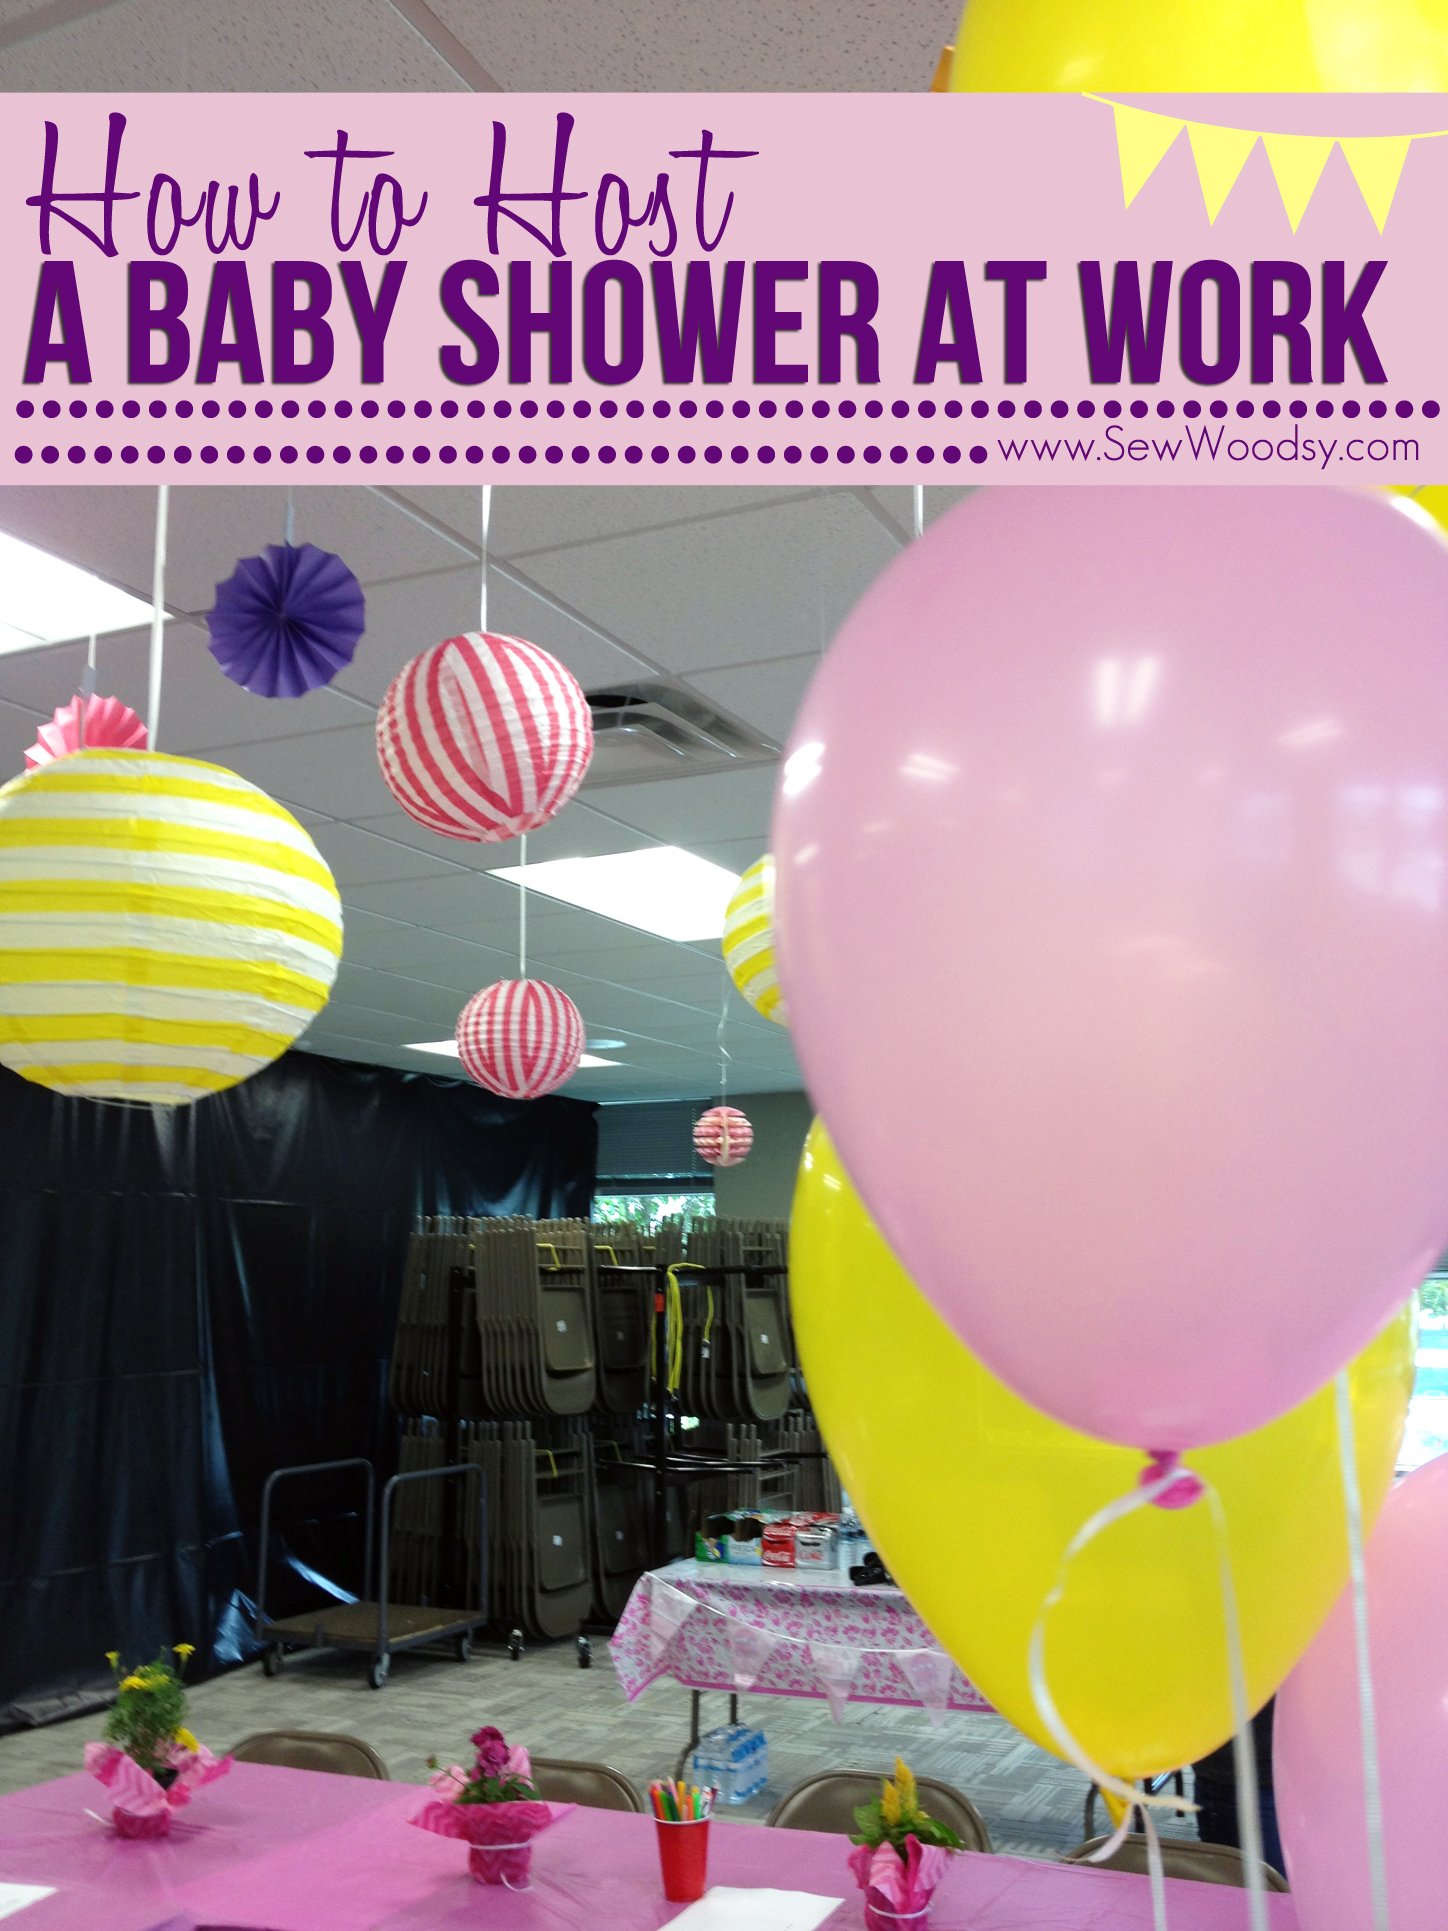 How to Host a Baby Shower at Work - Sew Woodsy